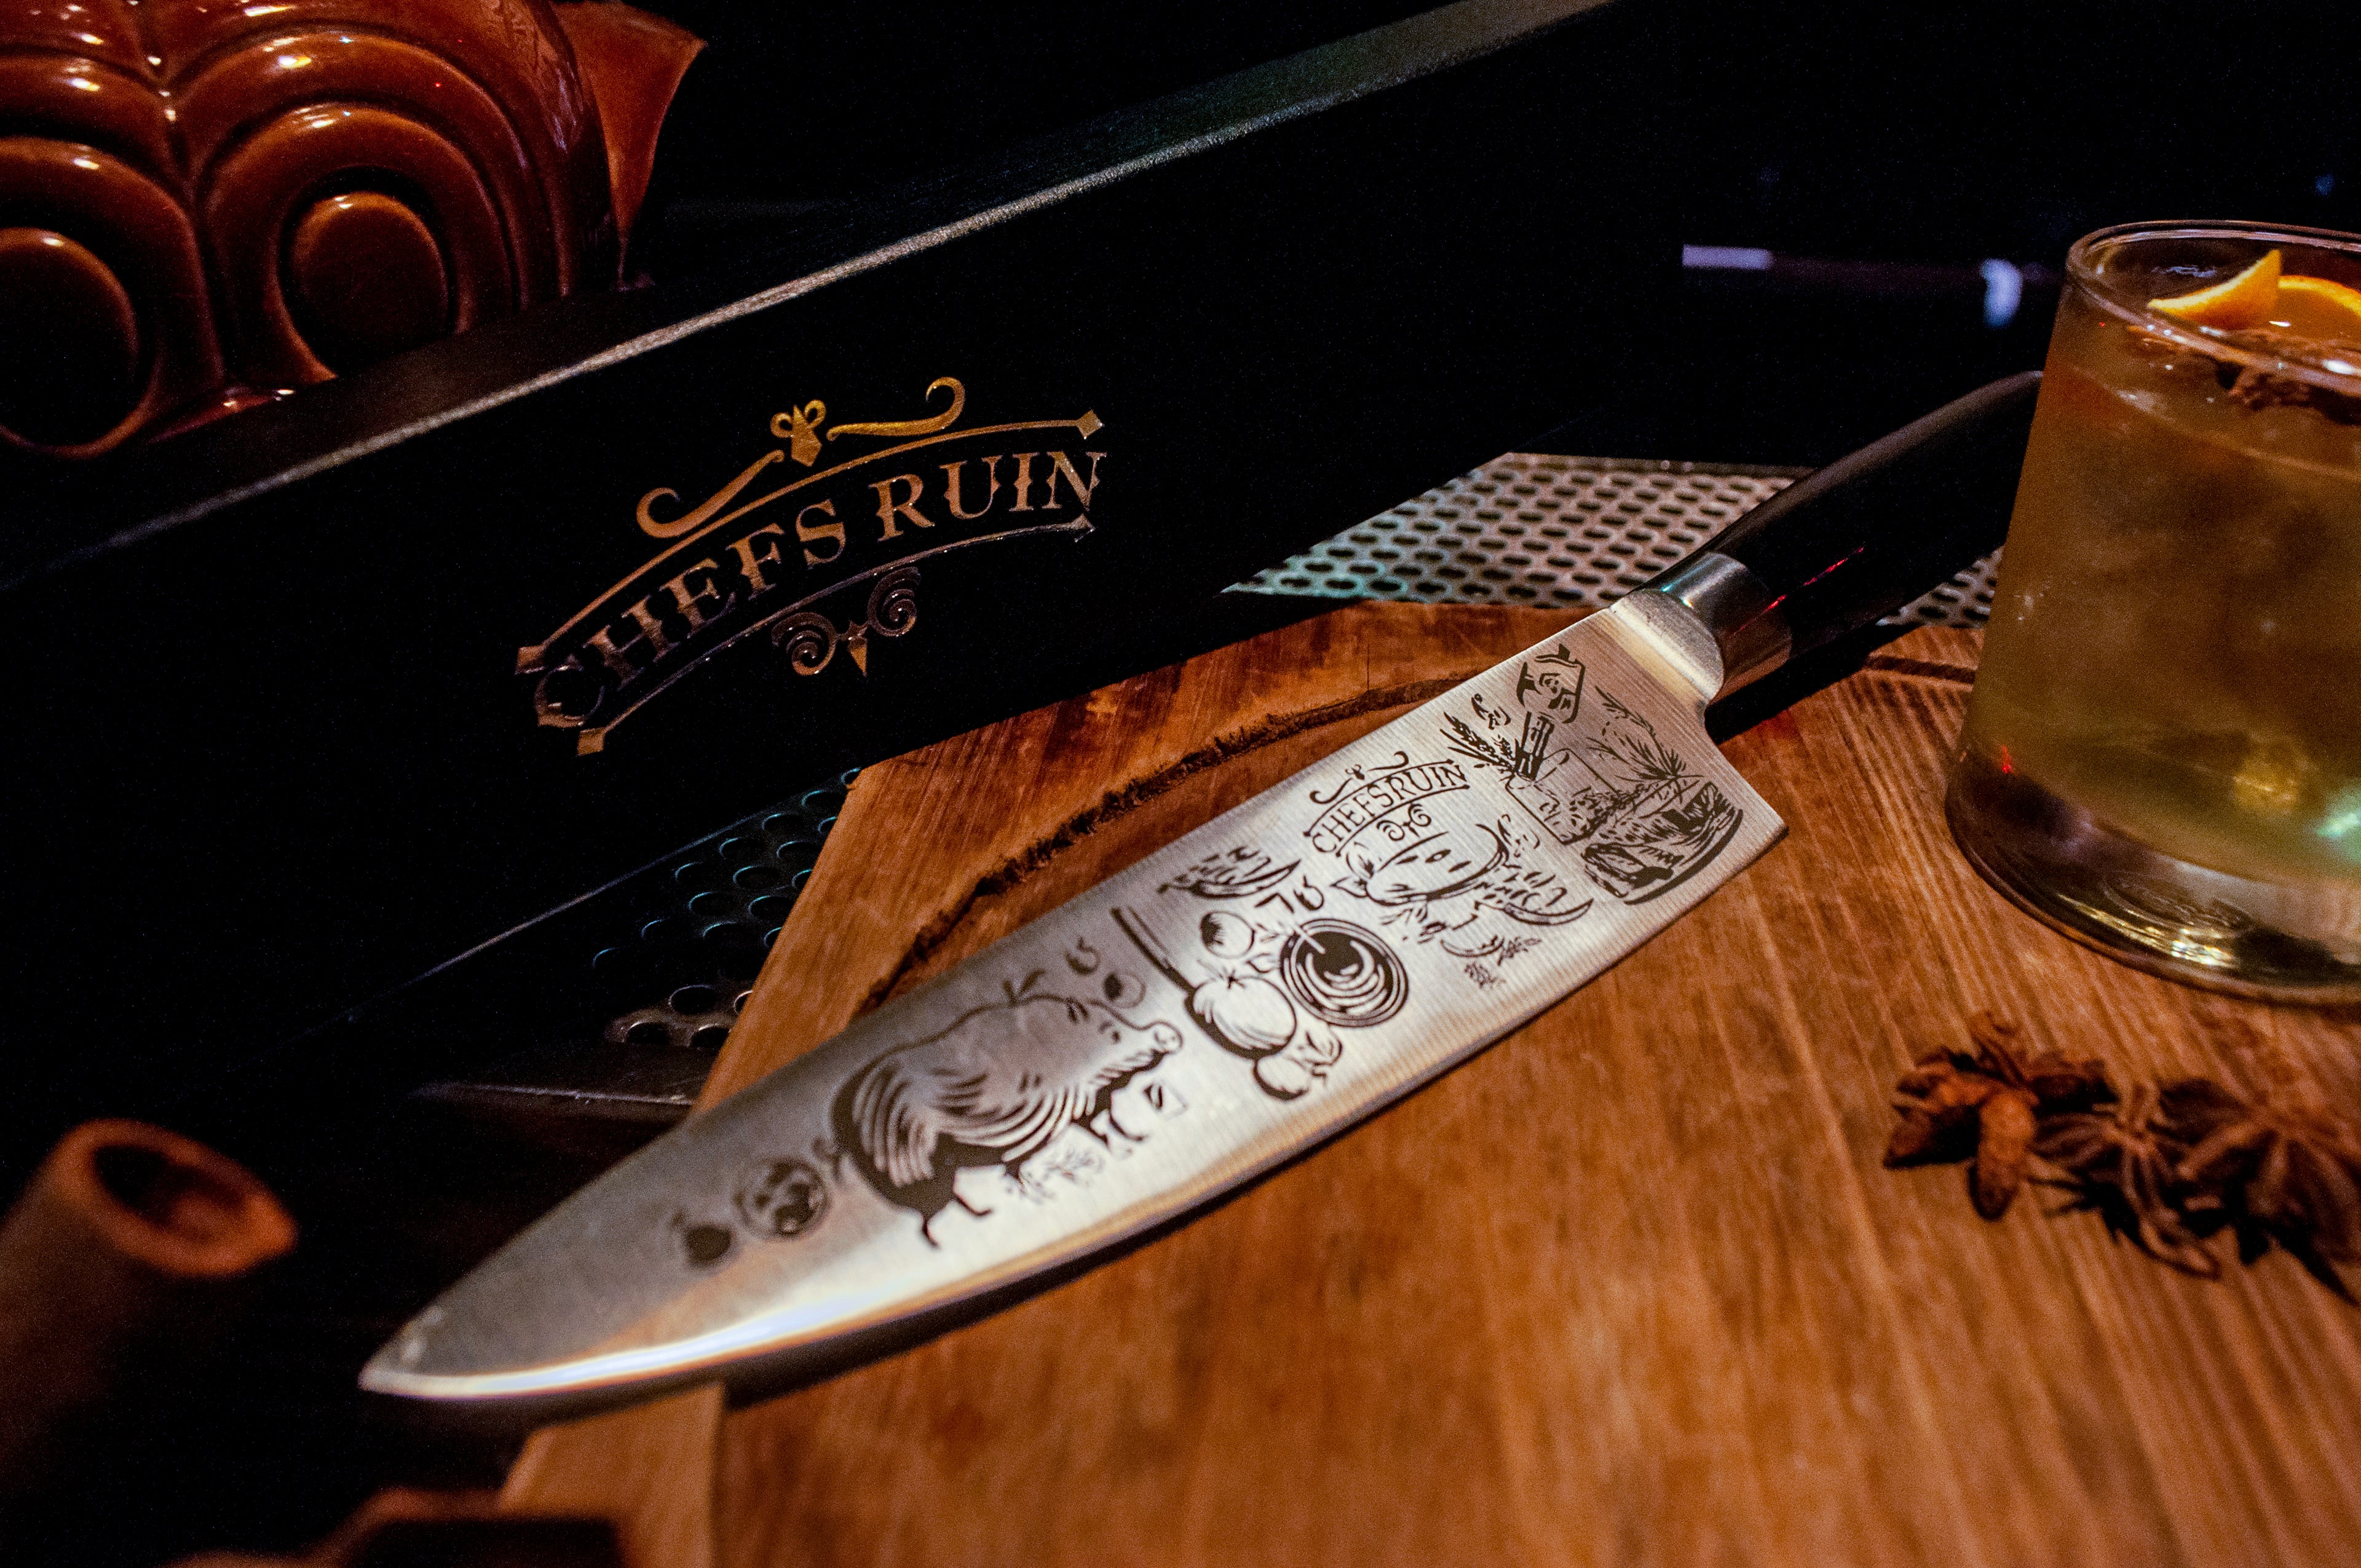 ChefsRuin chefs knife on a cutting board around various ingredients, herbs and spices